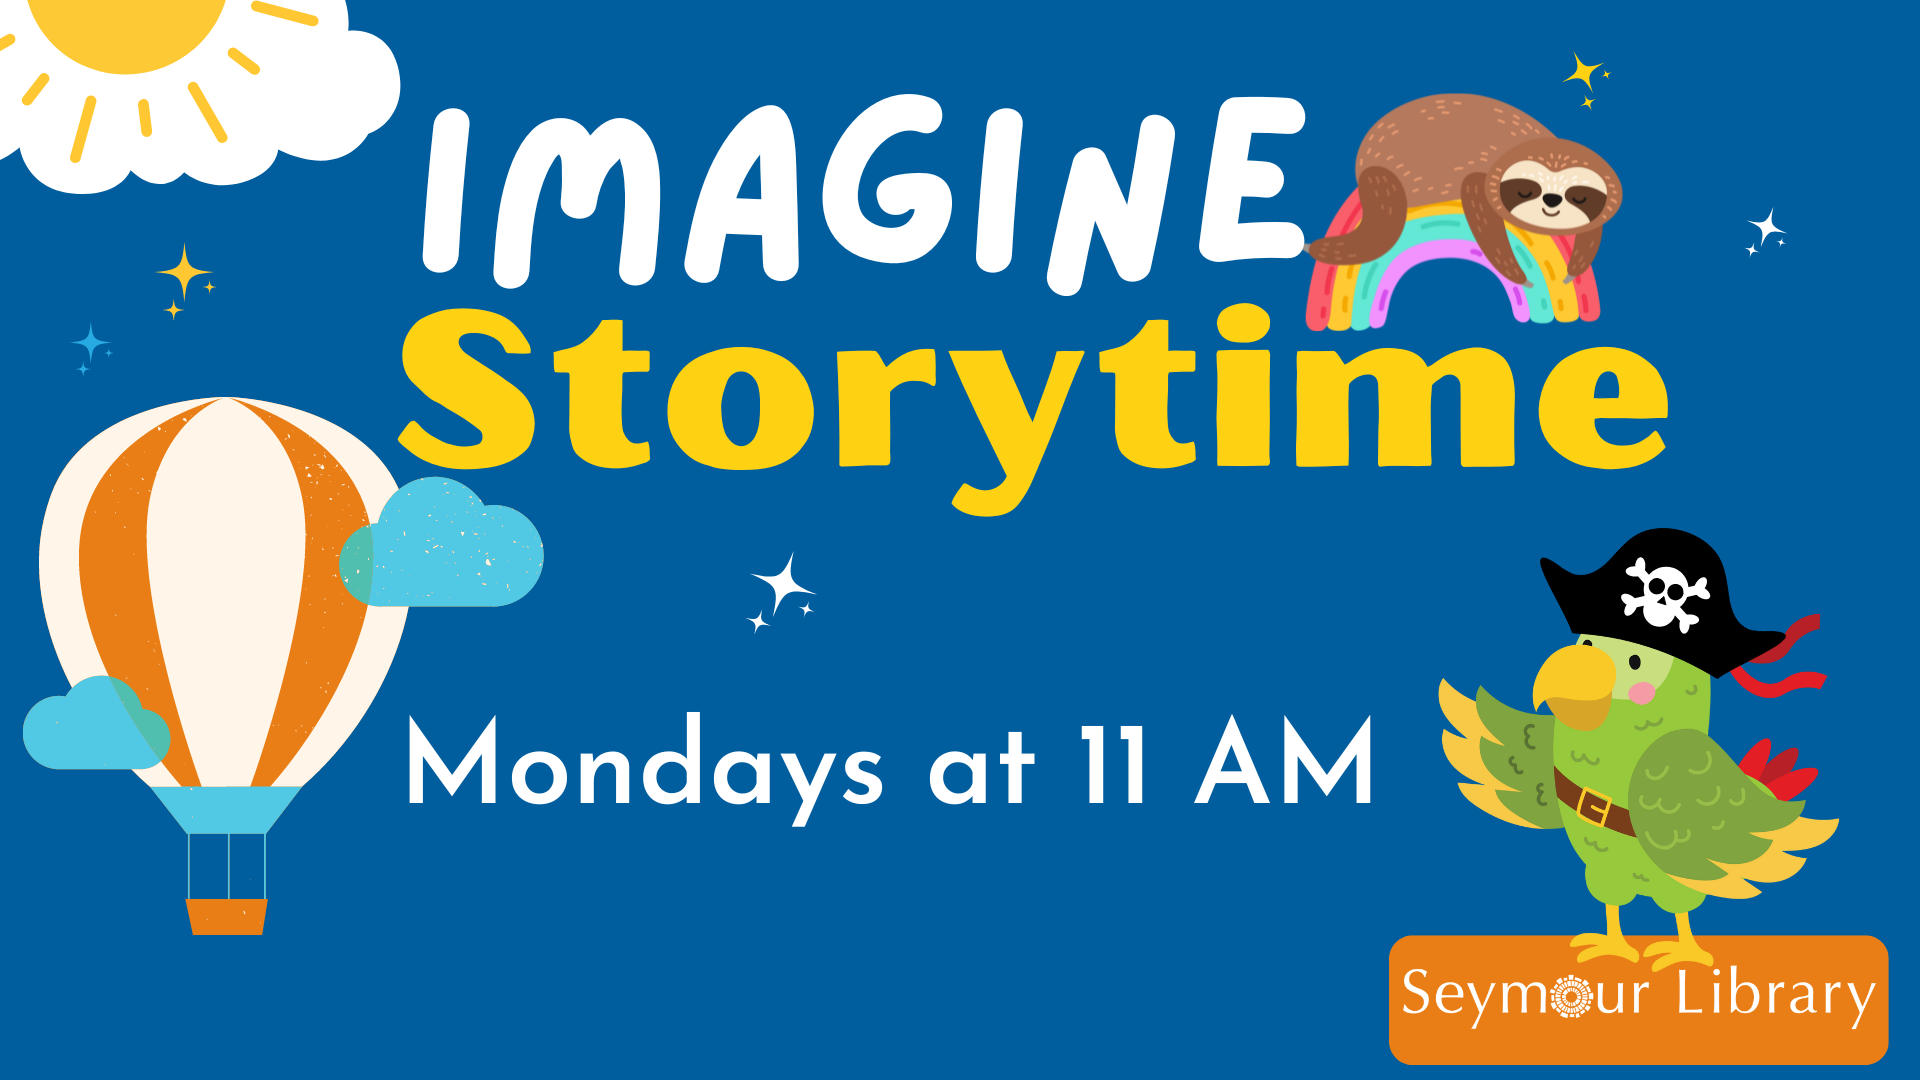 Imagine Storytime at Seymour Library, Mondays at 11 AM -- graphic with logo, hot air balloon, and animals